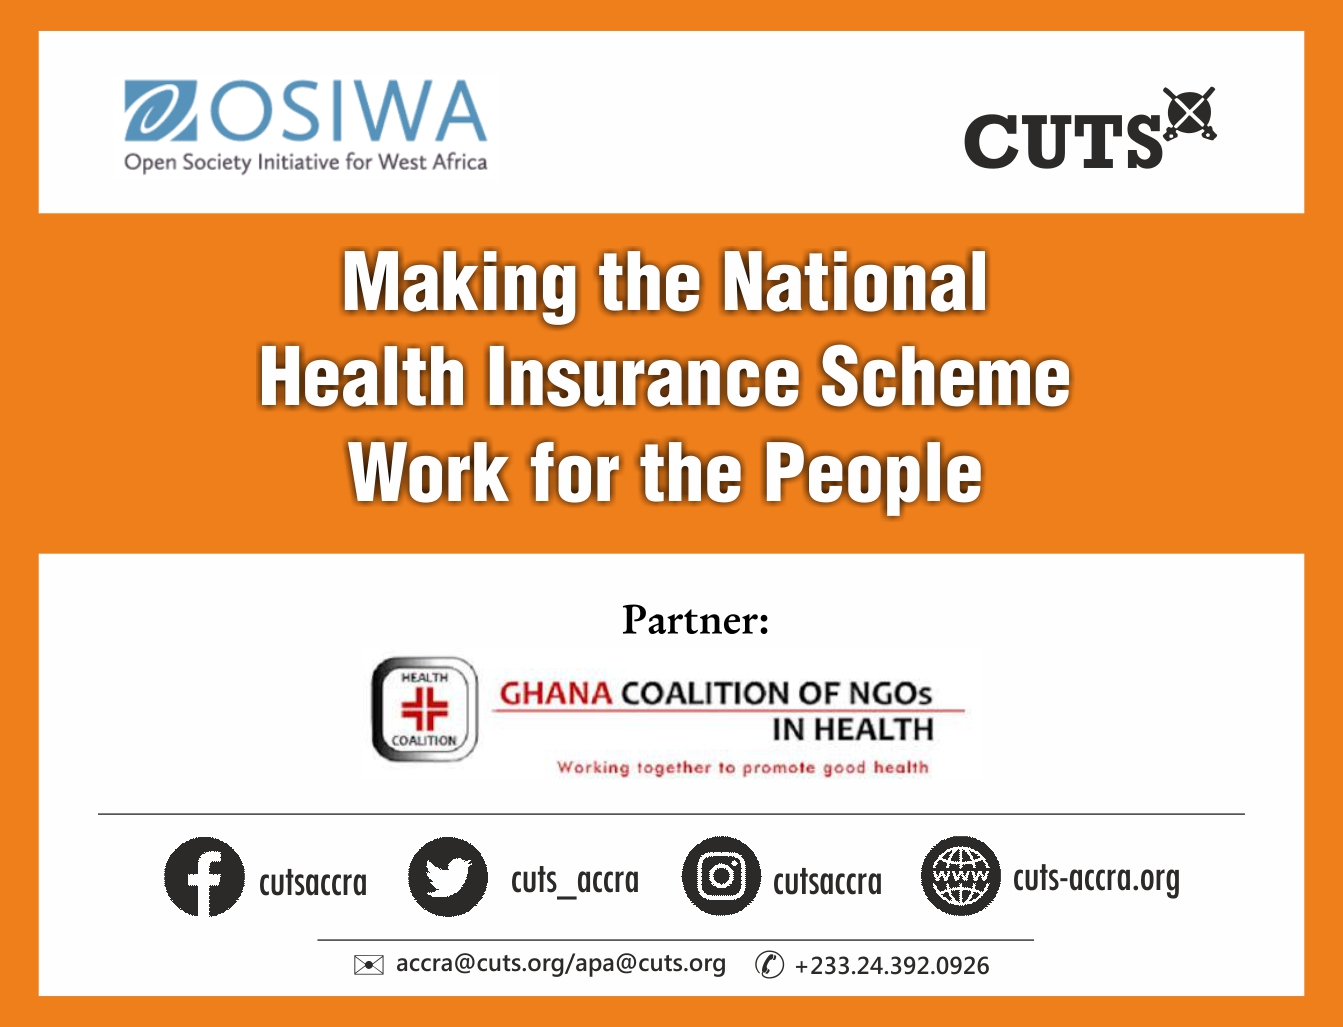 CUTS Ghana partners OSIWA to outdoor research report on NHIS challenges